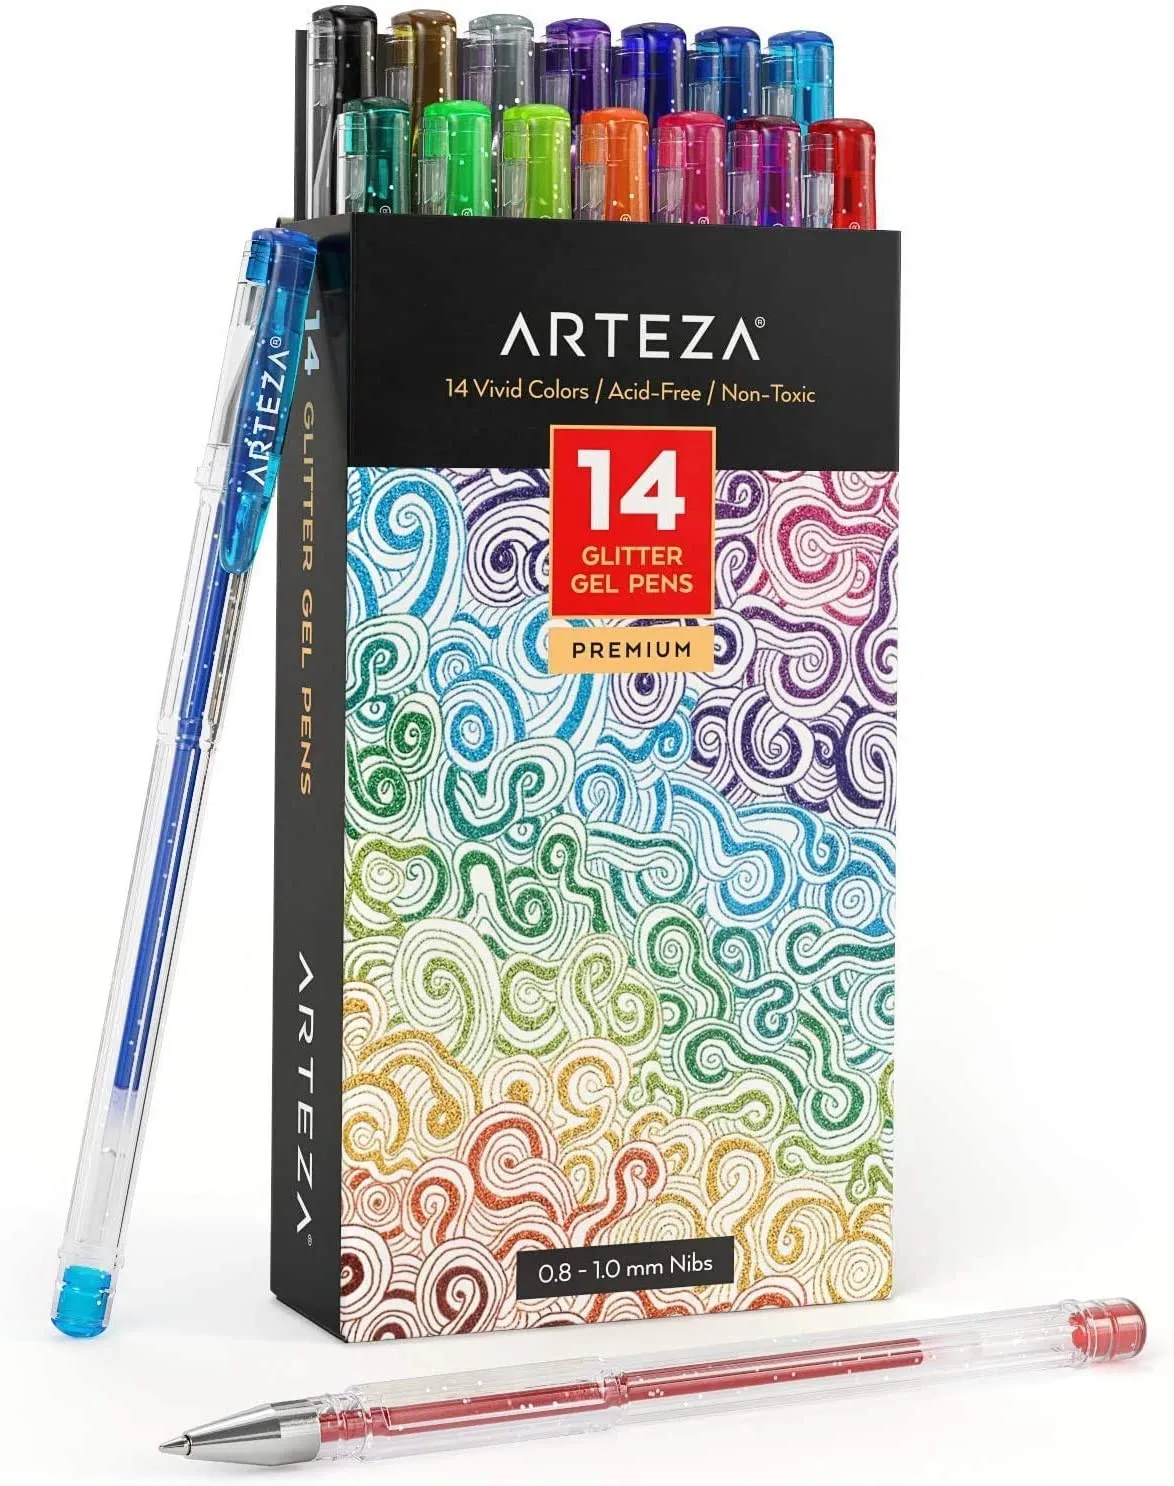 Arteza Gel Pen Set, White, 0.6mm, 0.8mm, and 1.00 mm Nibs - Doodle, Draw, Journal -3 Pack